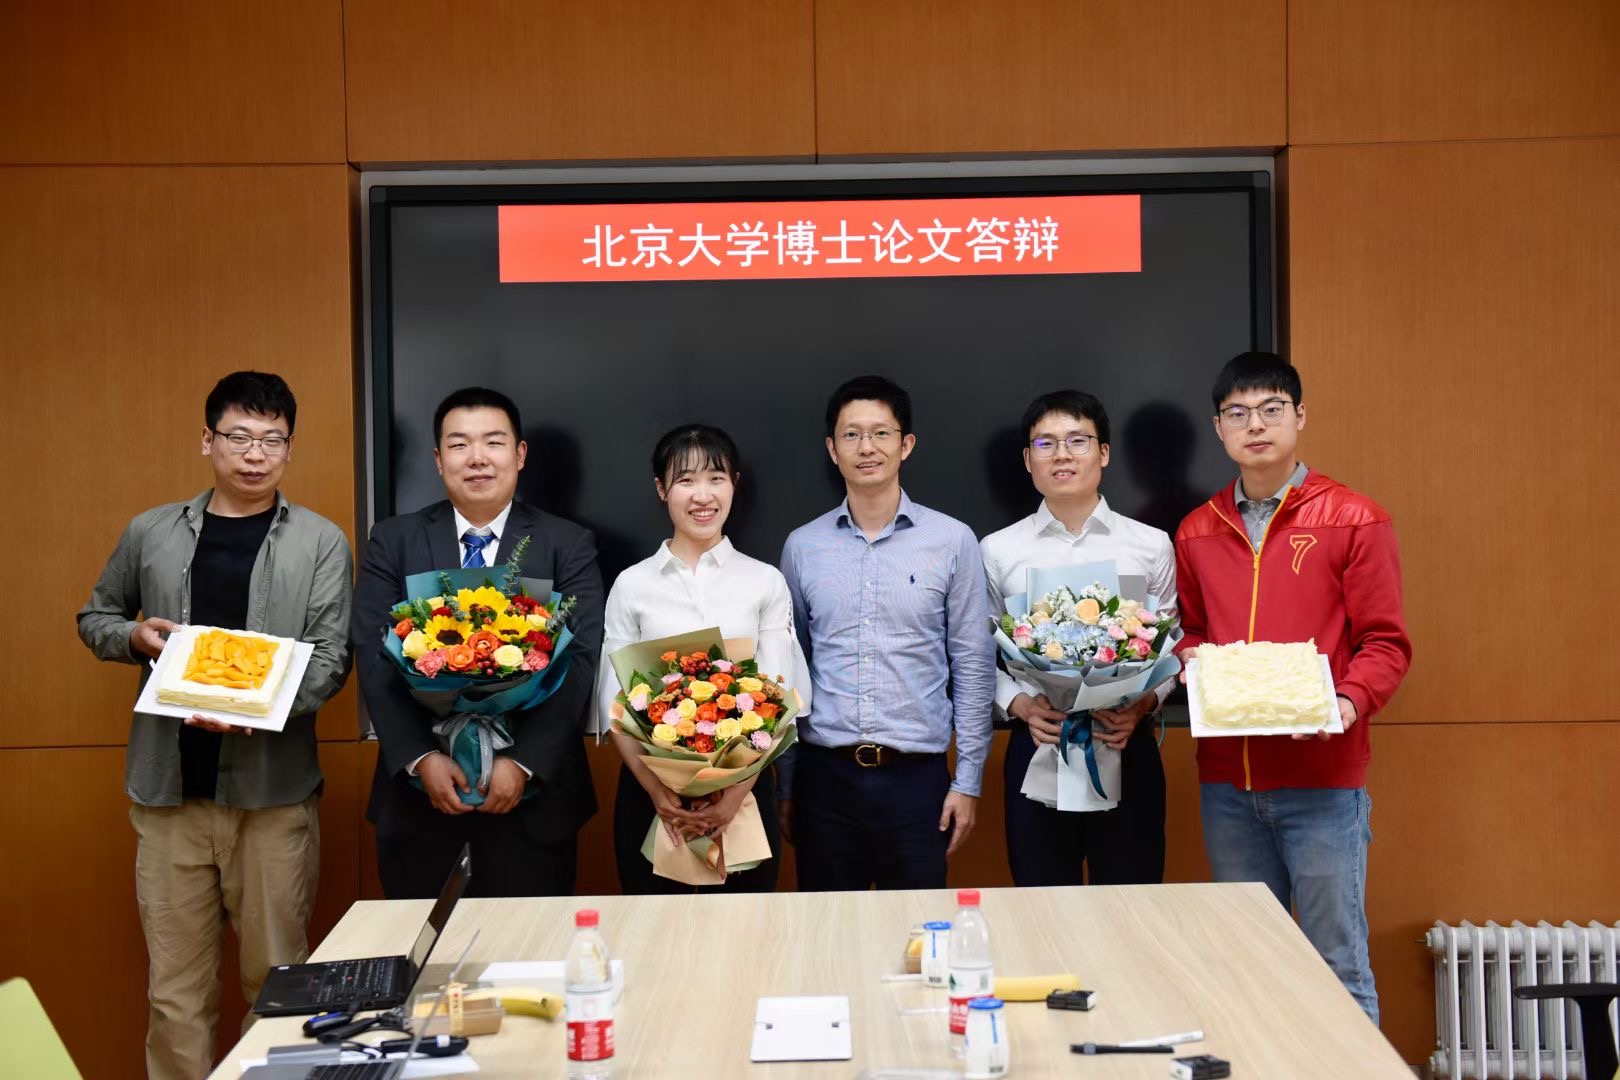 Congrats to Dr. Lu Bo, Dr. Meng Haowei, Dr. Lv Zhicong, Dr. Wang Kun and Dr. He Bo for the outstanding Ph.D. defense!